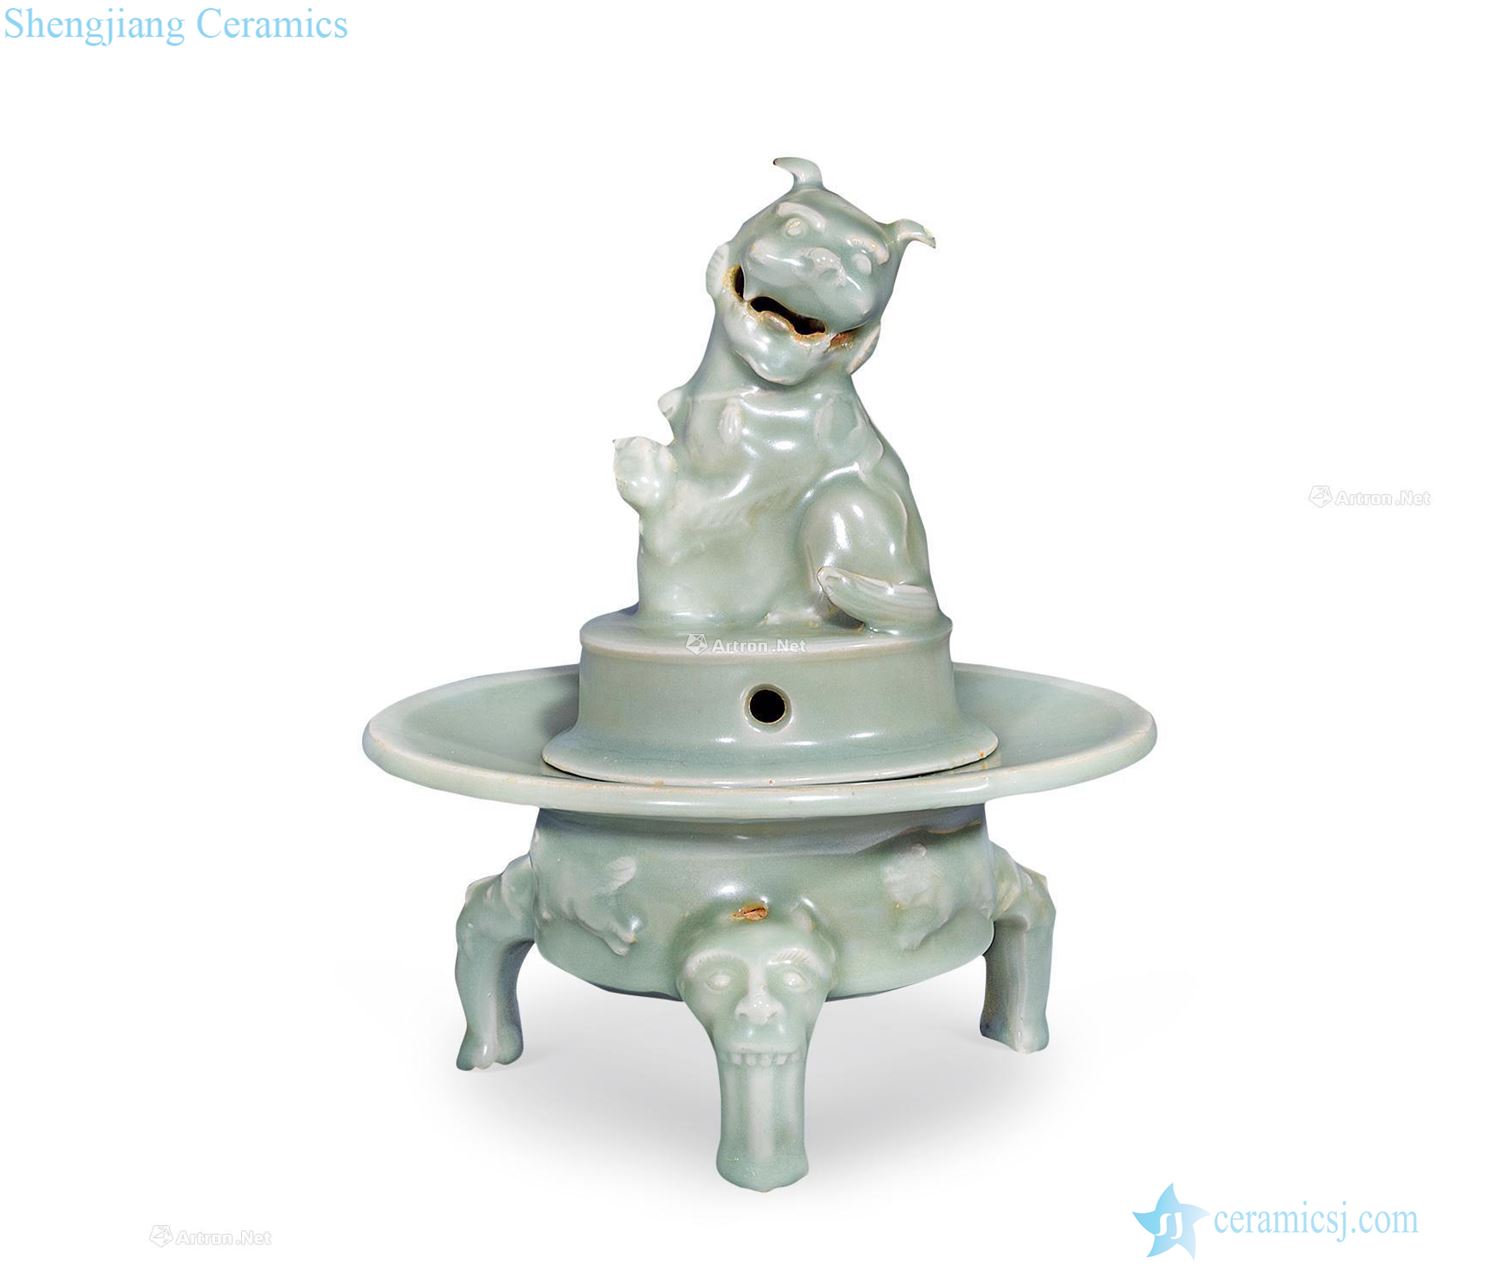 And the early yuan dynasty Longquan celadon benevolent fuming furnace with three legs